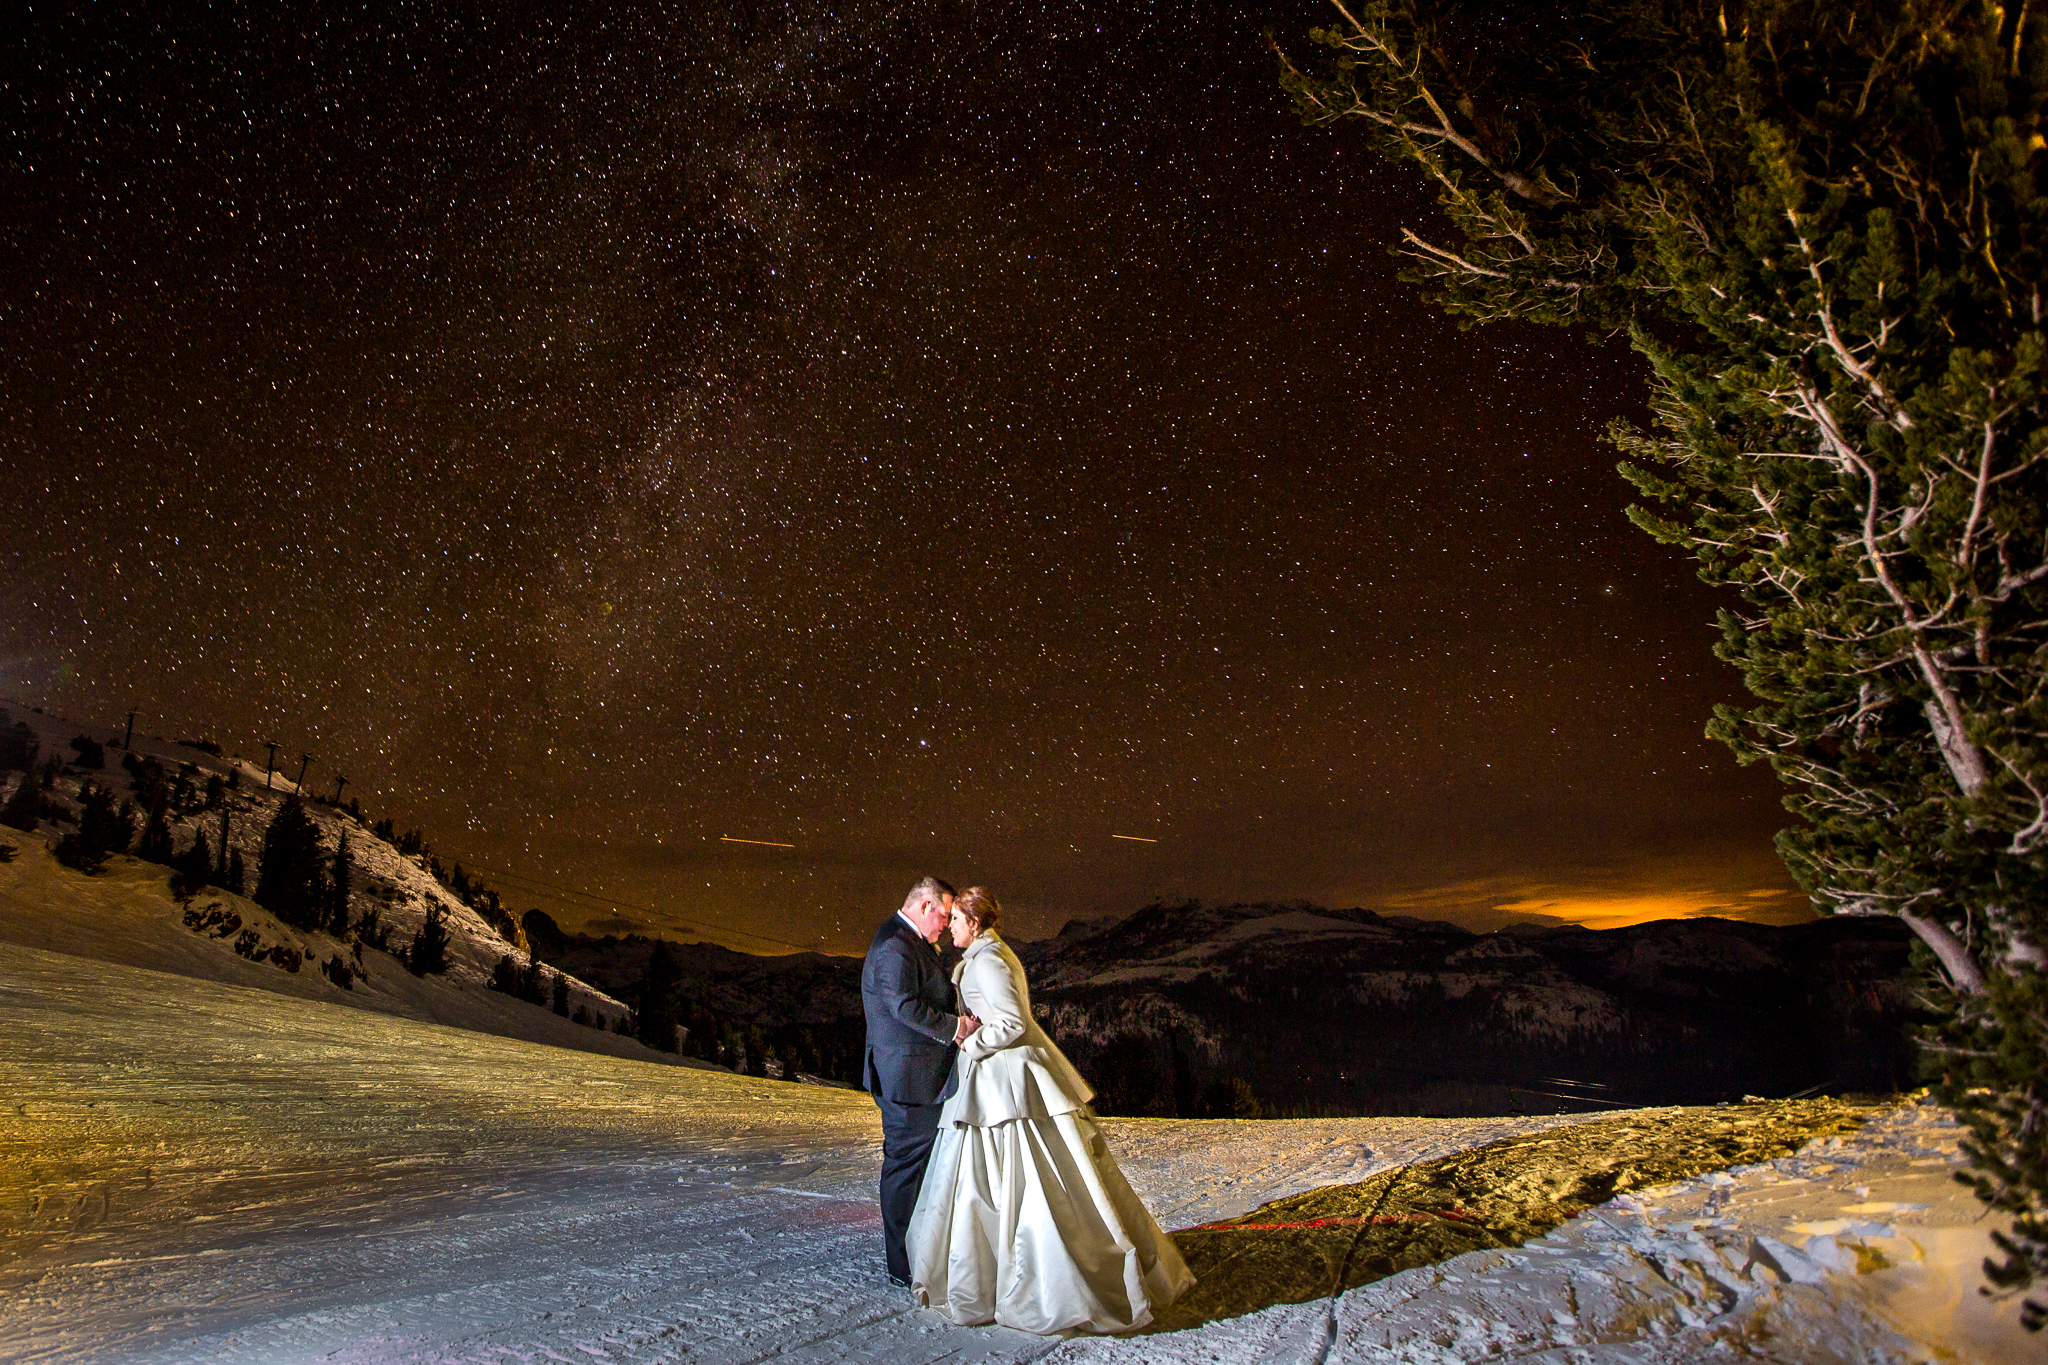 Katherine and her husband at Mammoth Lakes, CA during their wedding in December 2015. 